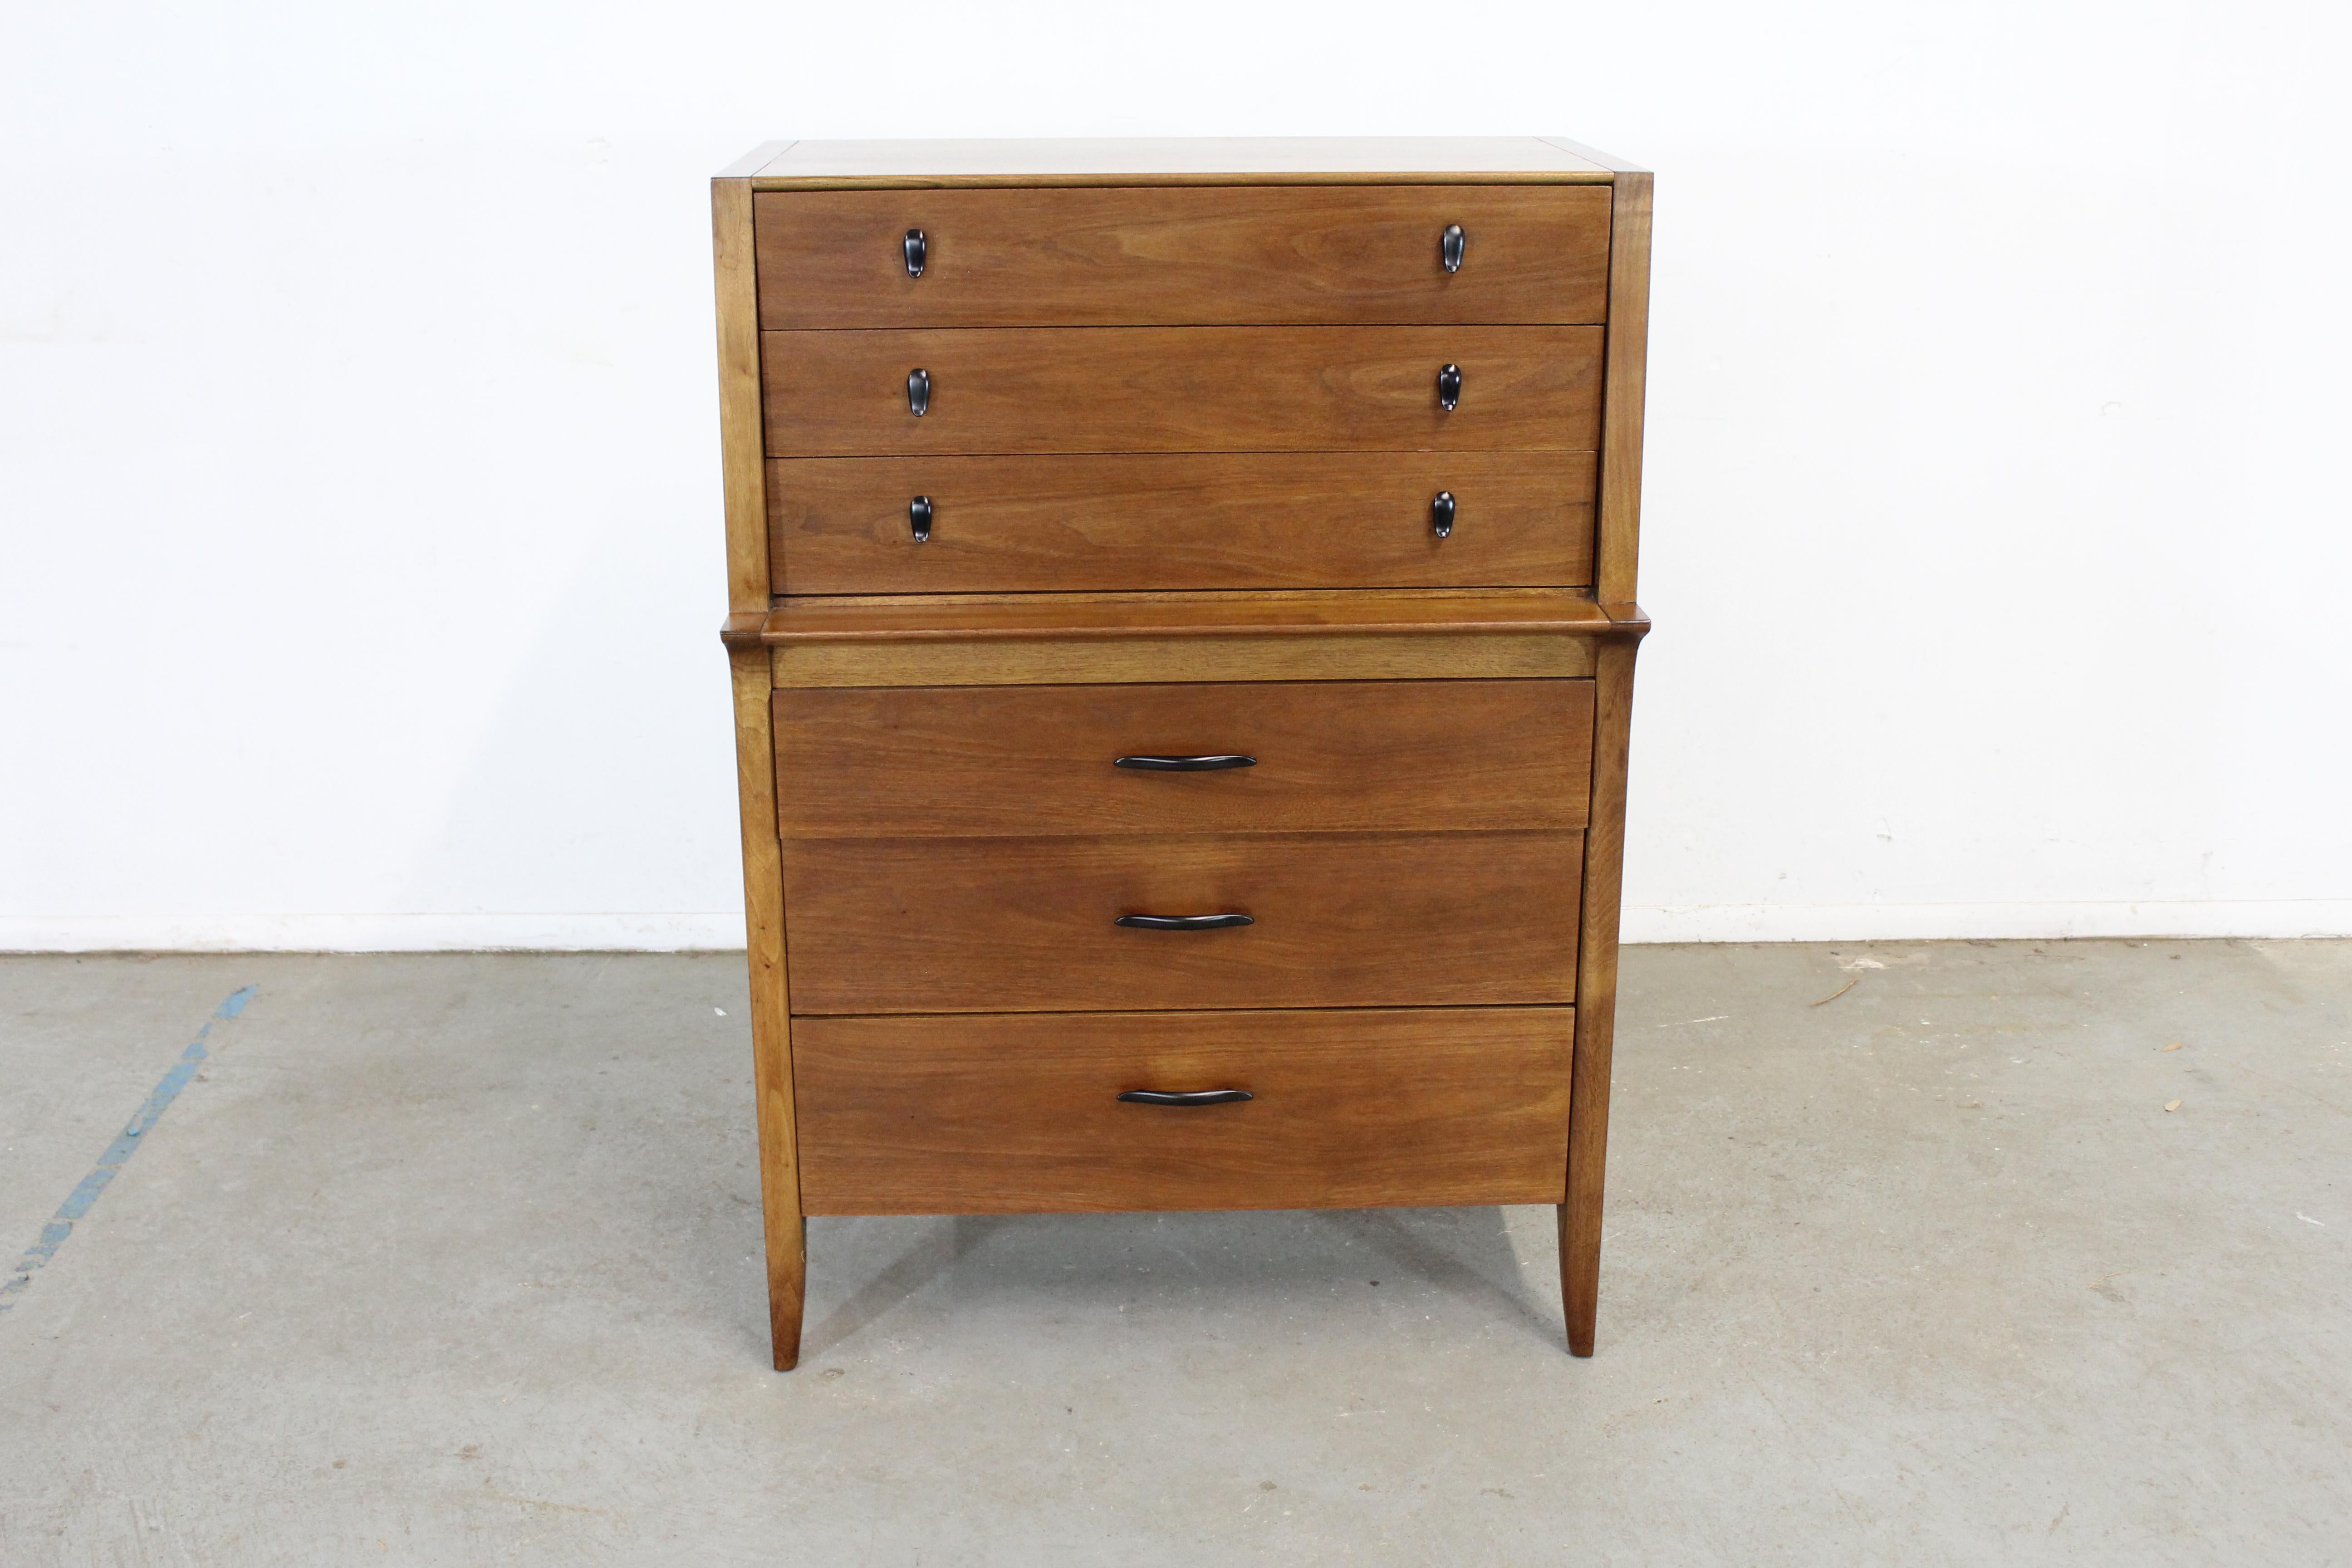 Mid-Century Modern Walnut John Van Koert tall chest

Offered is a beautiful Mid-Century Modern Walnut John Van Koert tall chest with ample storage space, which was manufactured by Drexel. Features six drawers. It has been refinished and is in good